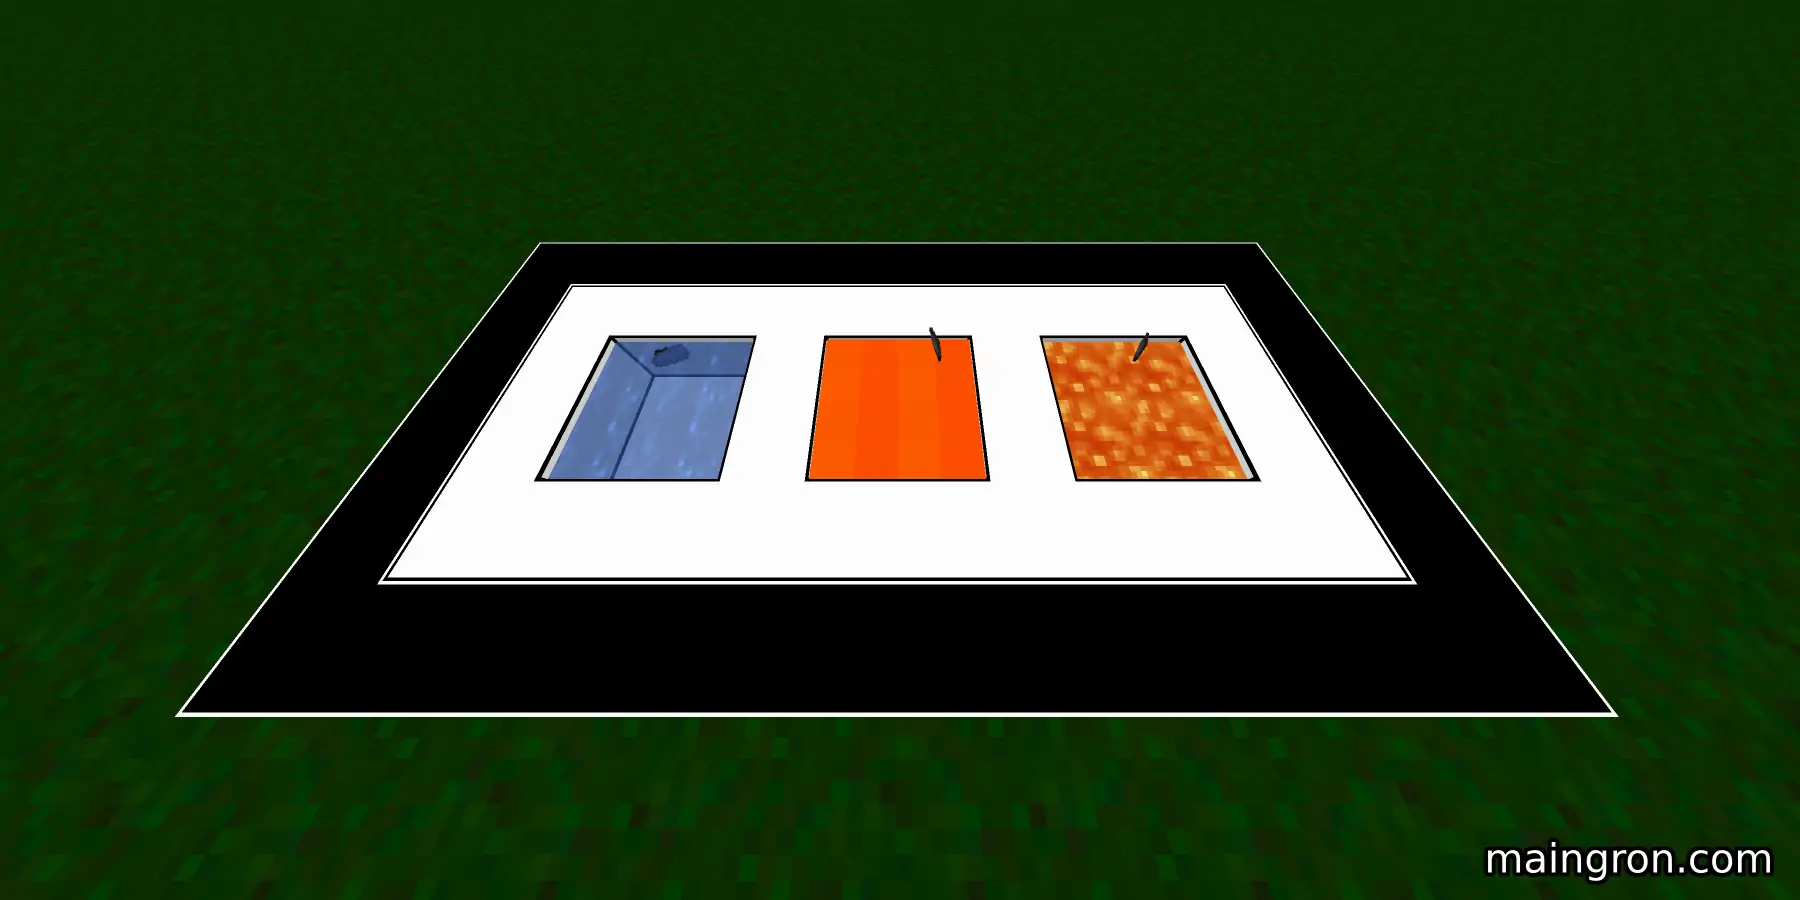 3 fluids next to each other in Minecraft.